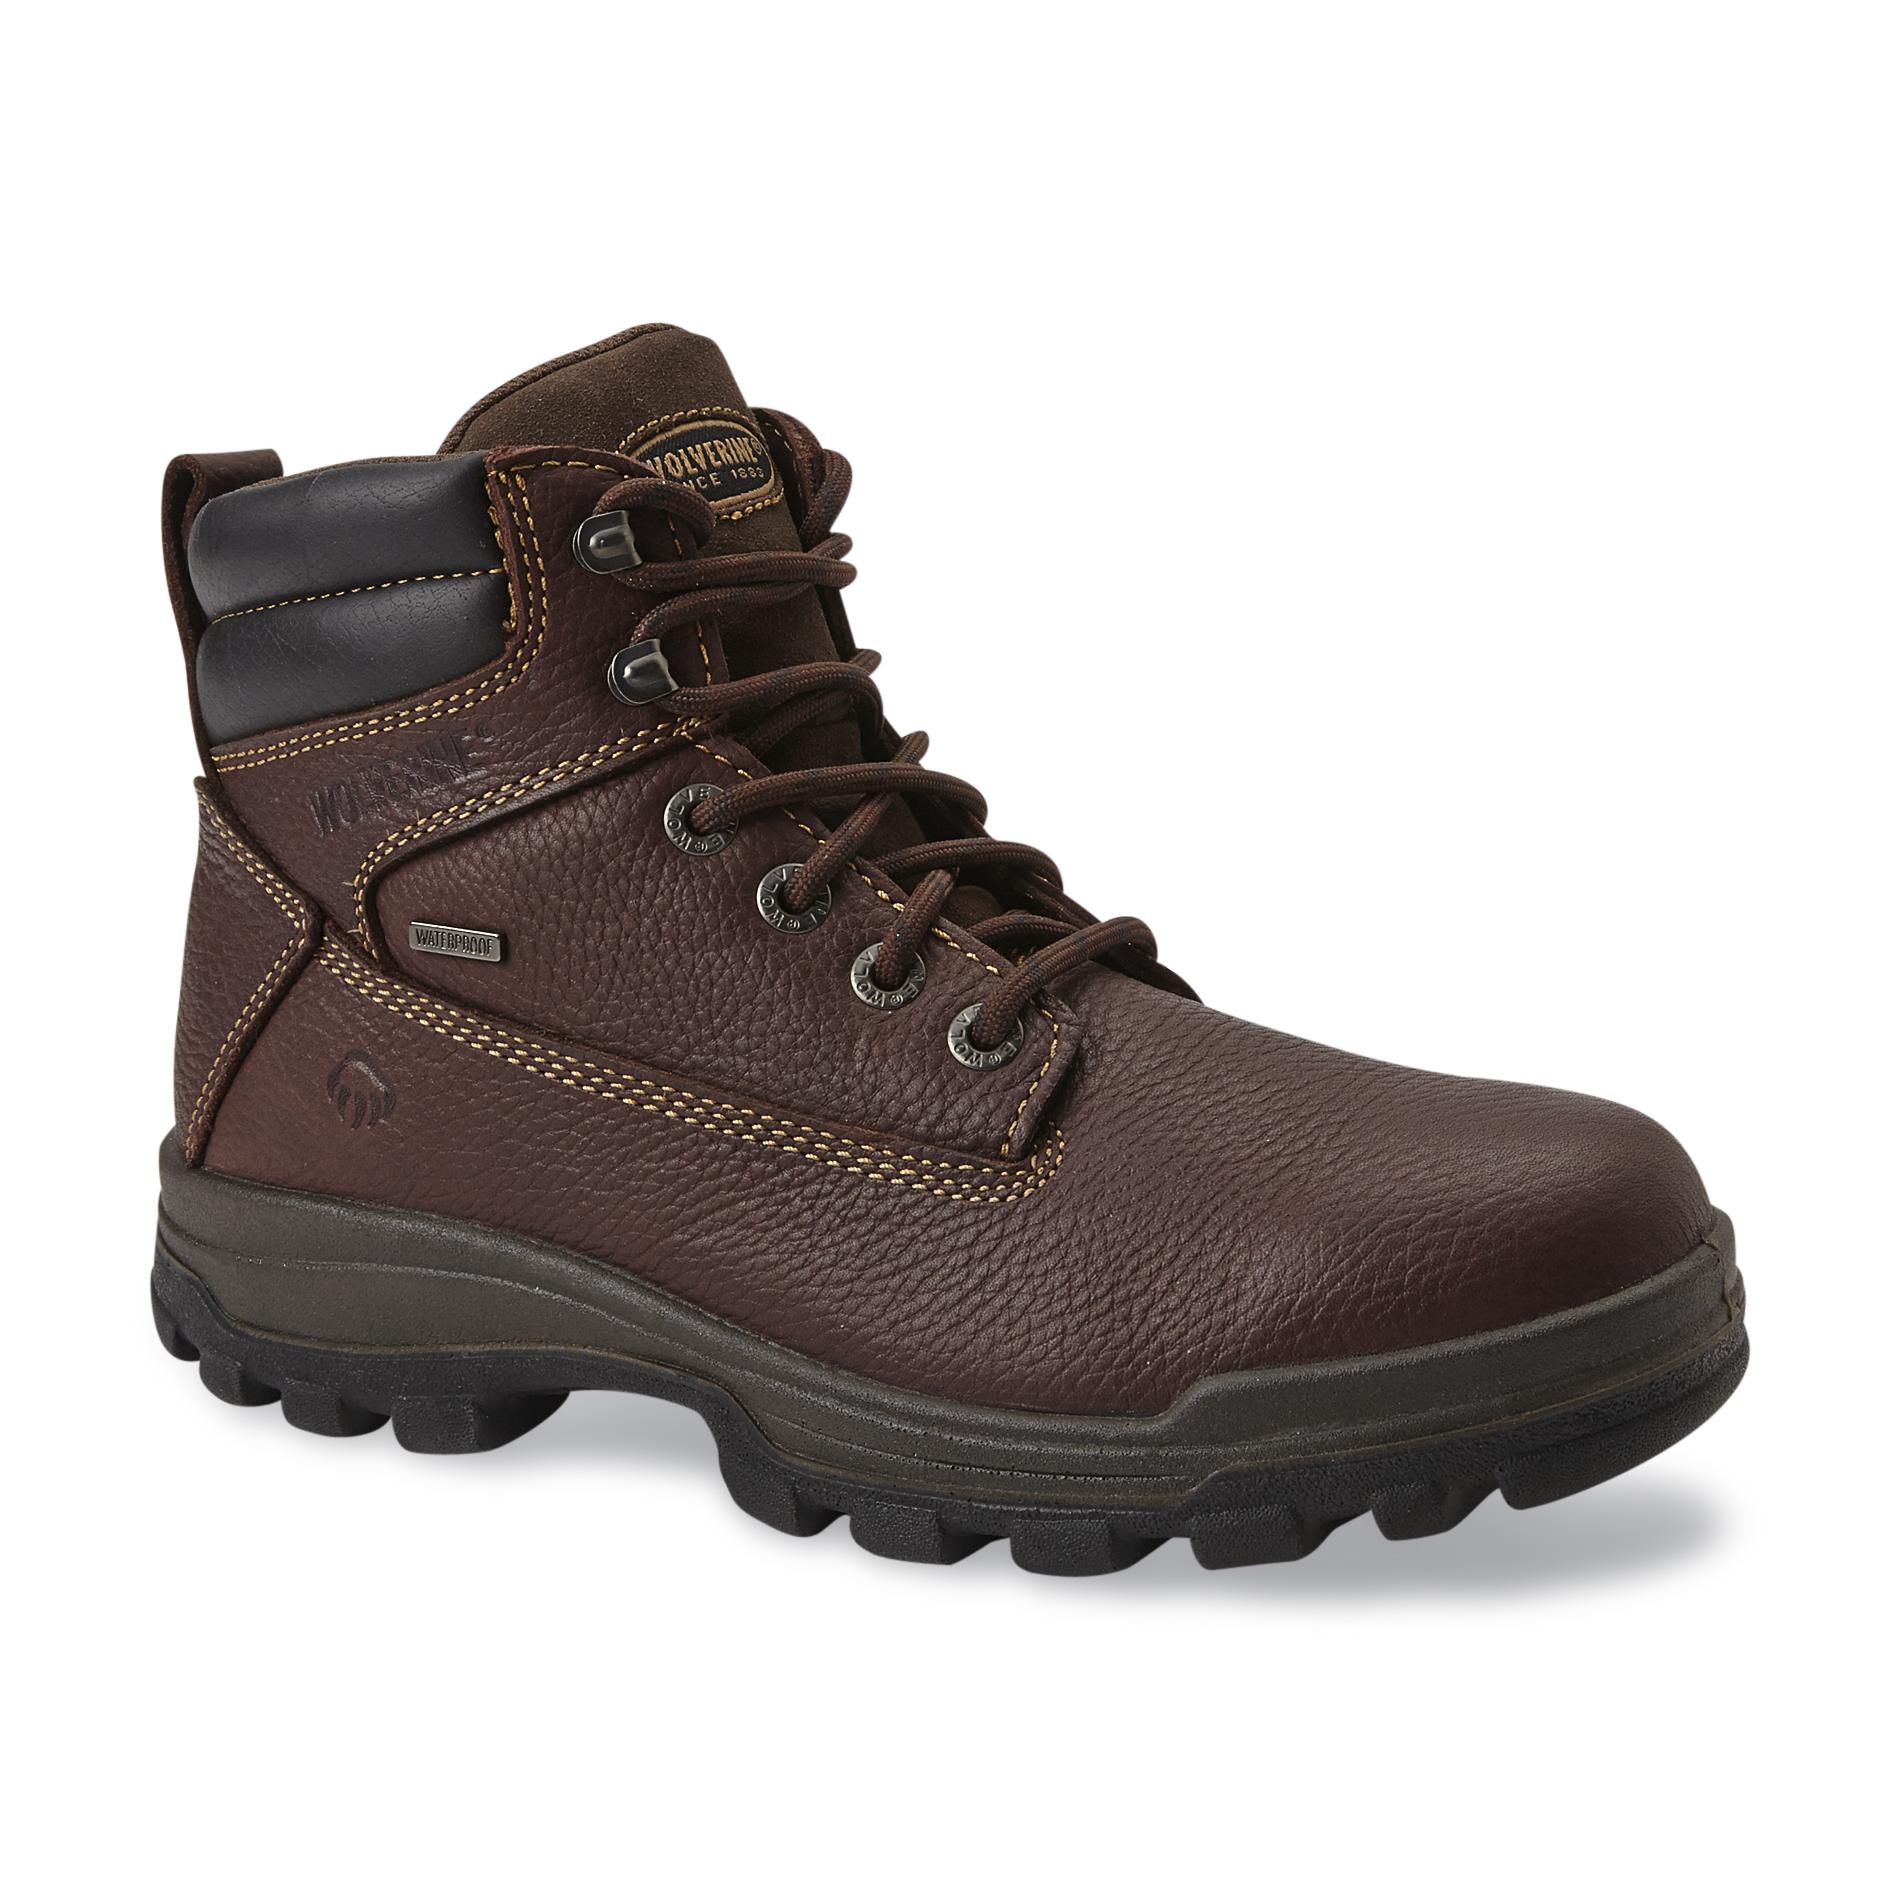 Men's Work Shoes \u0026 Boots On Sale - Sears